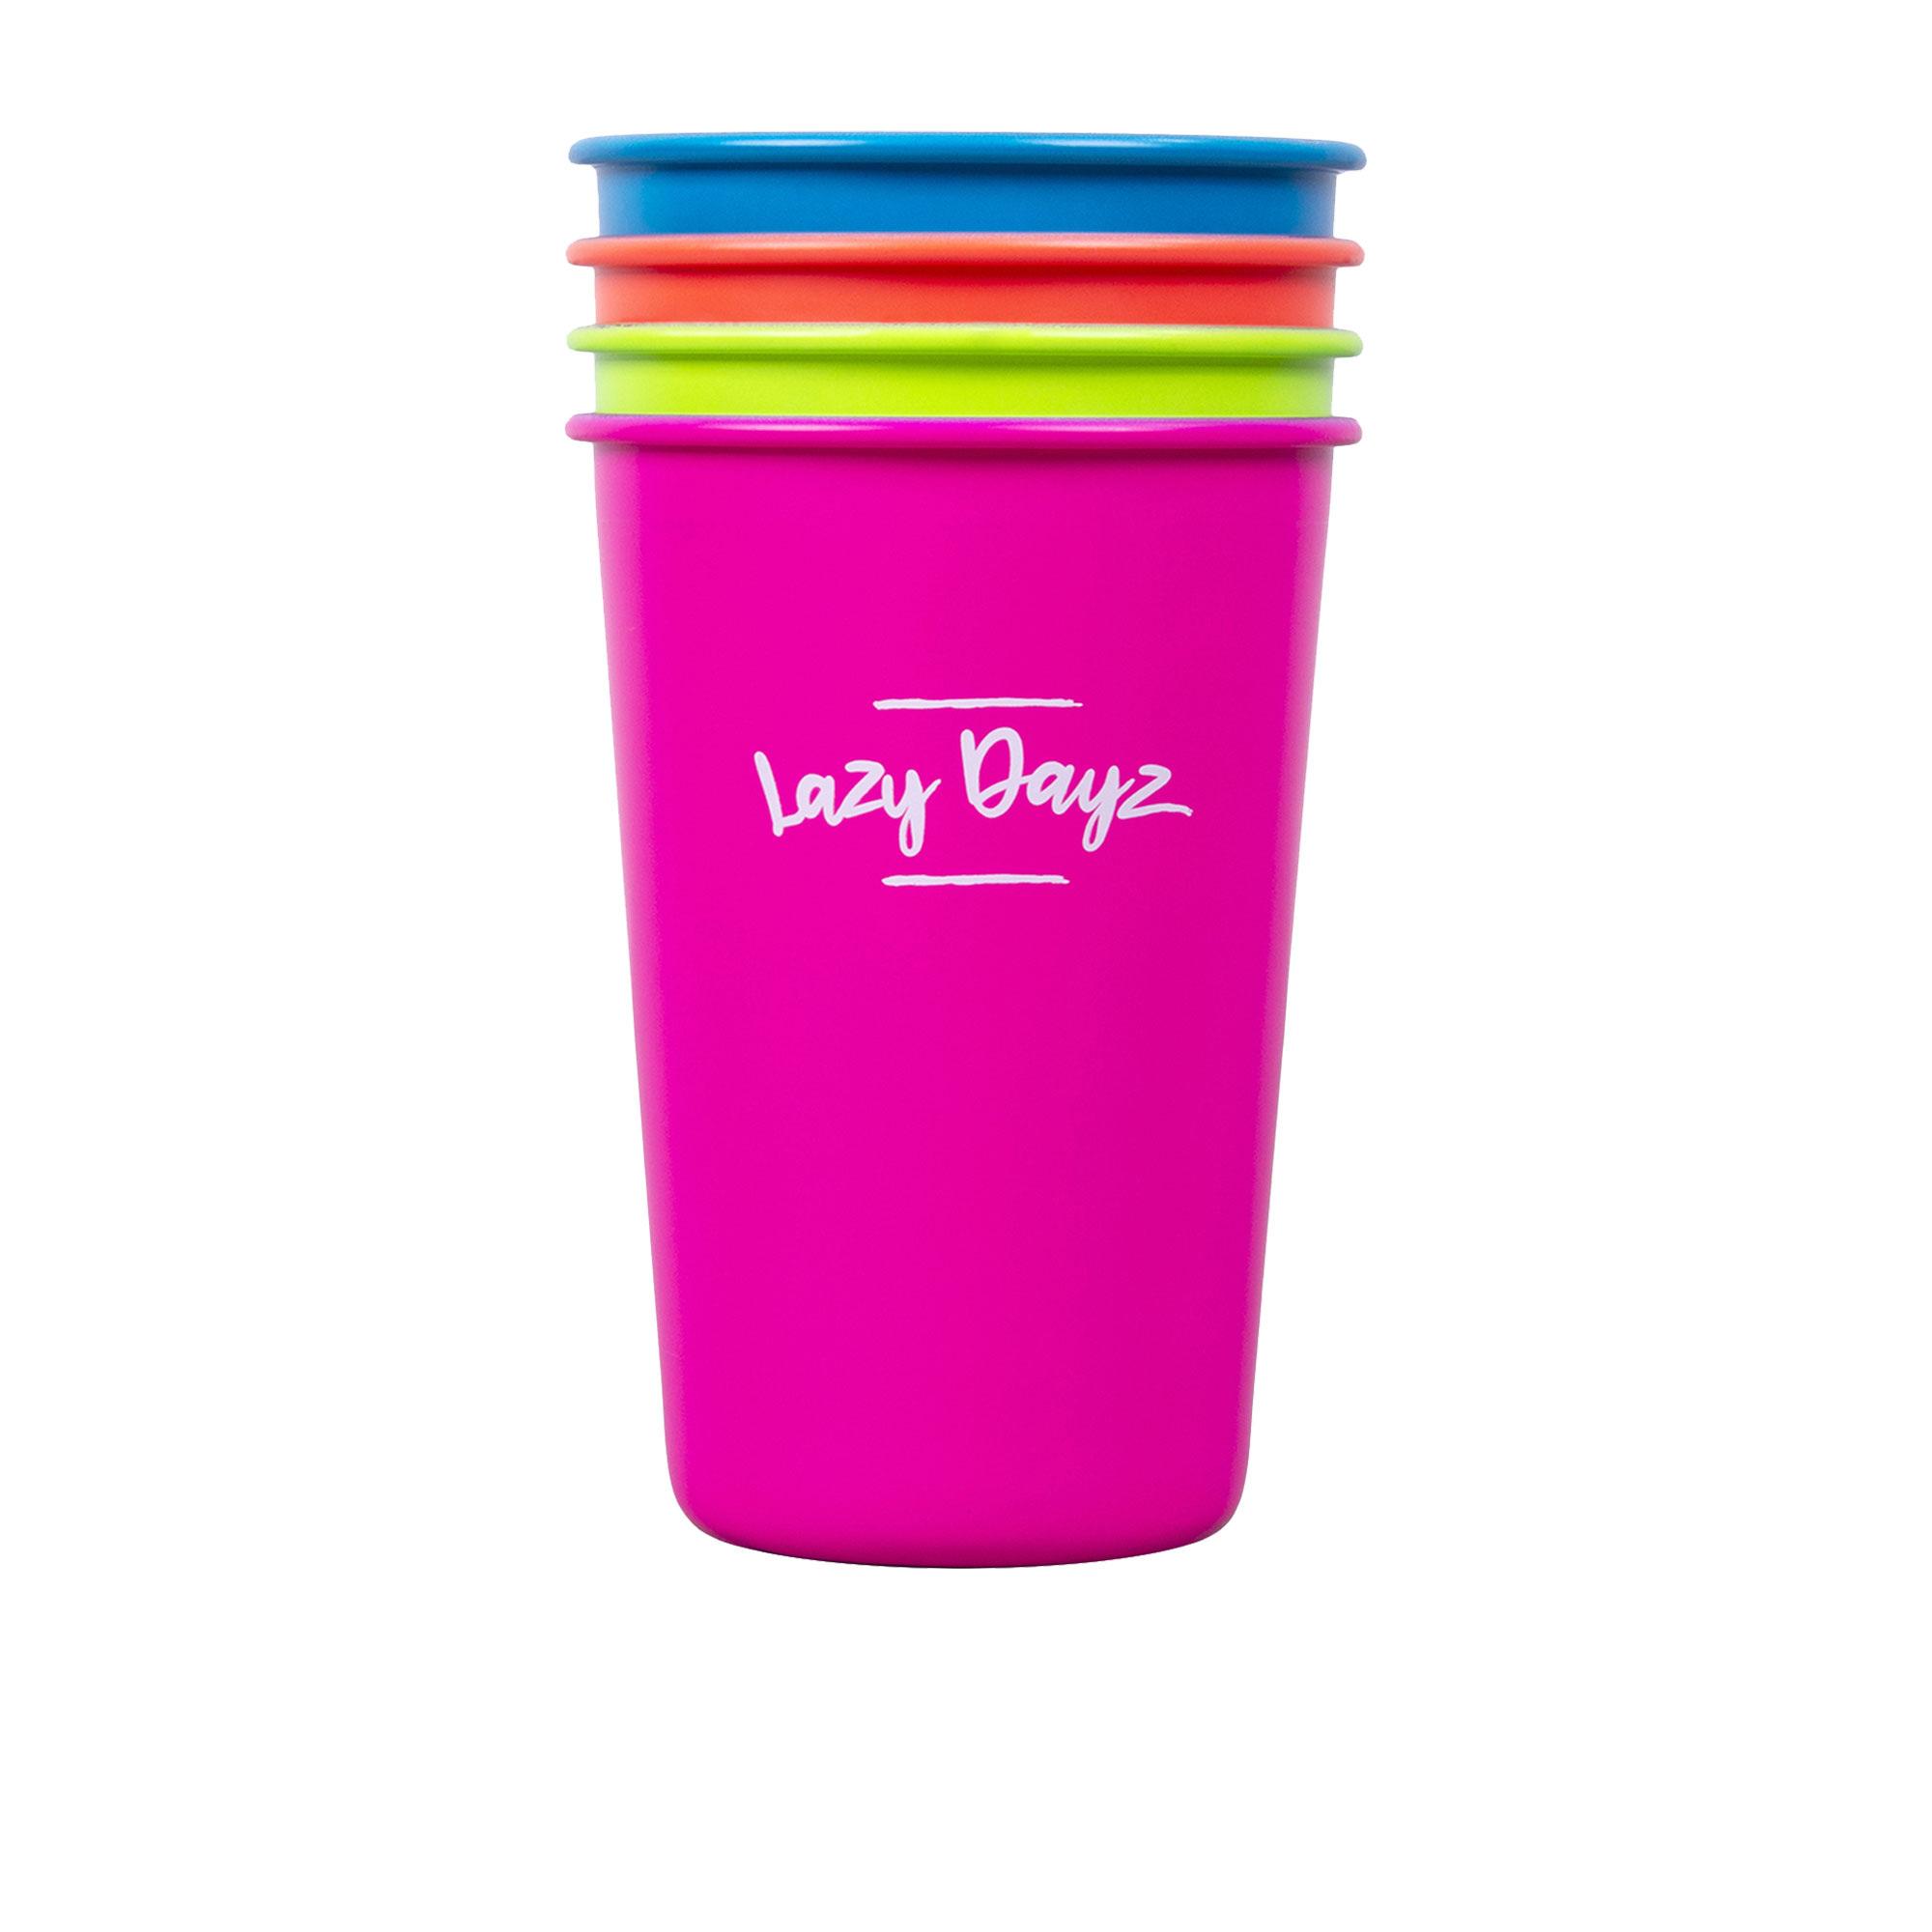 Lazy Dayz Picnic Cup 350ml Set of 4 Multicolour Image 1